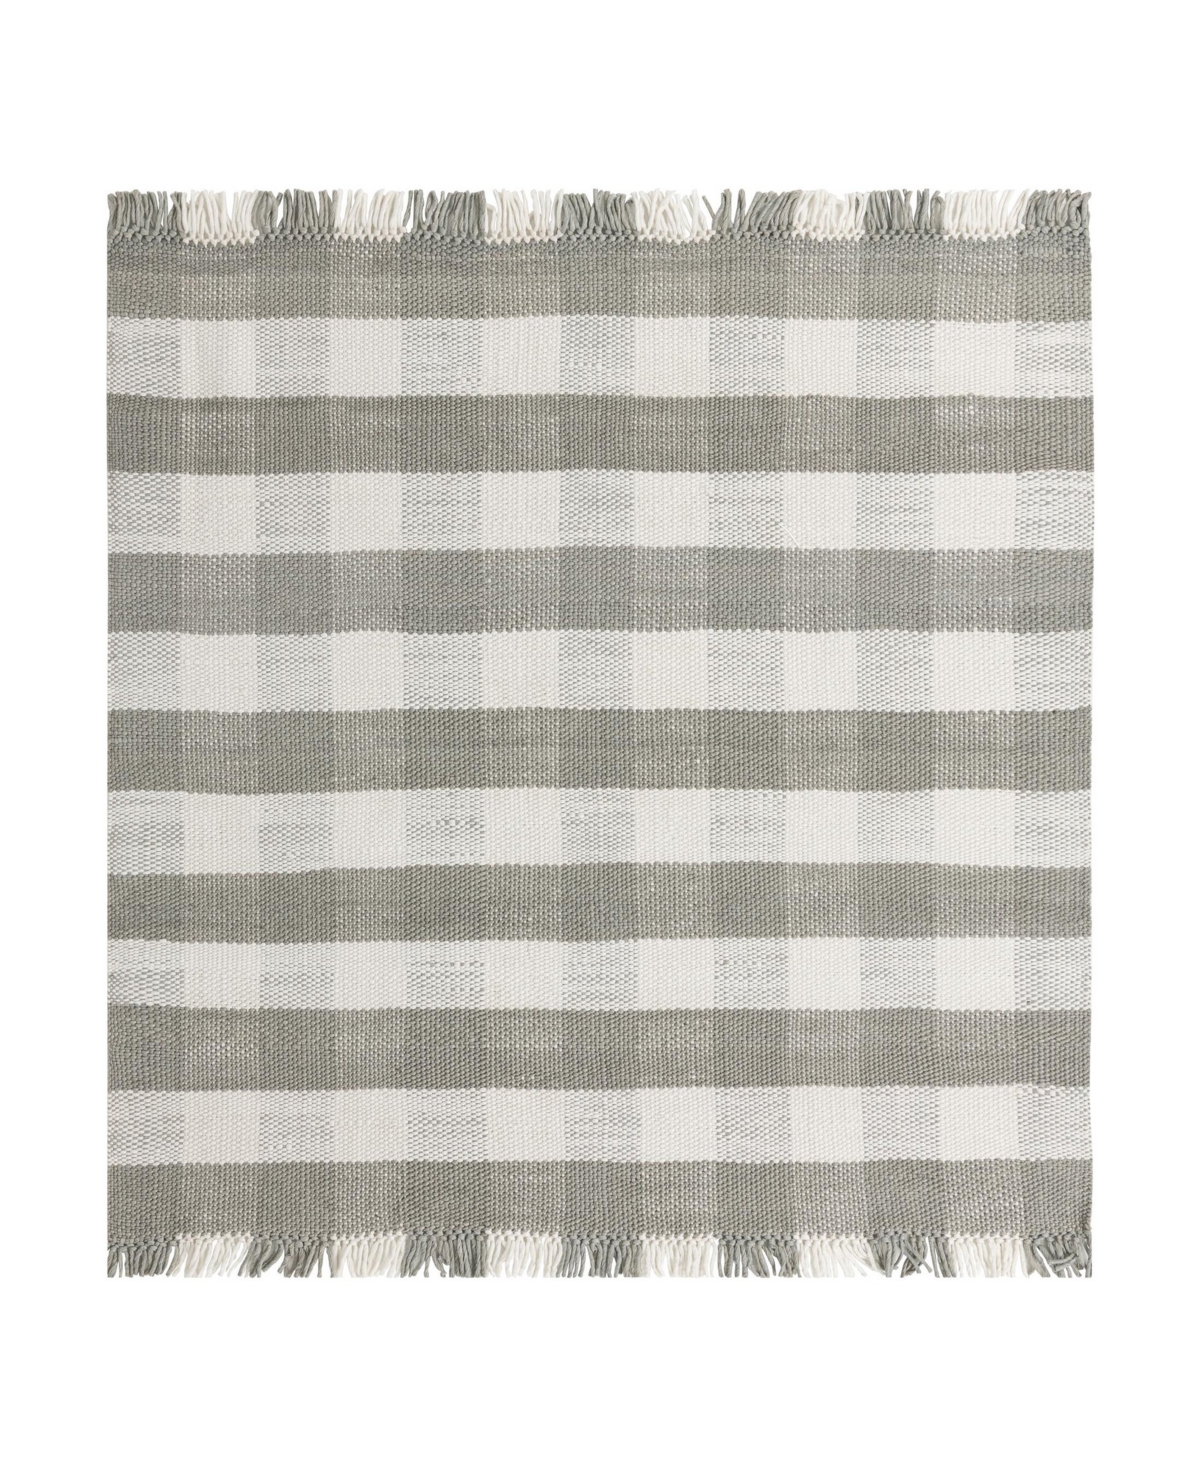 Bayshore Home Pure Plaid Indoor Outdoor Washable Ppd-01 7'10in x 7'10in Square Area Rug - Gray